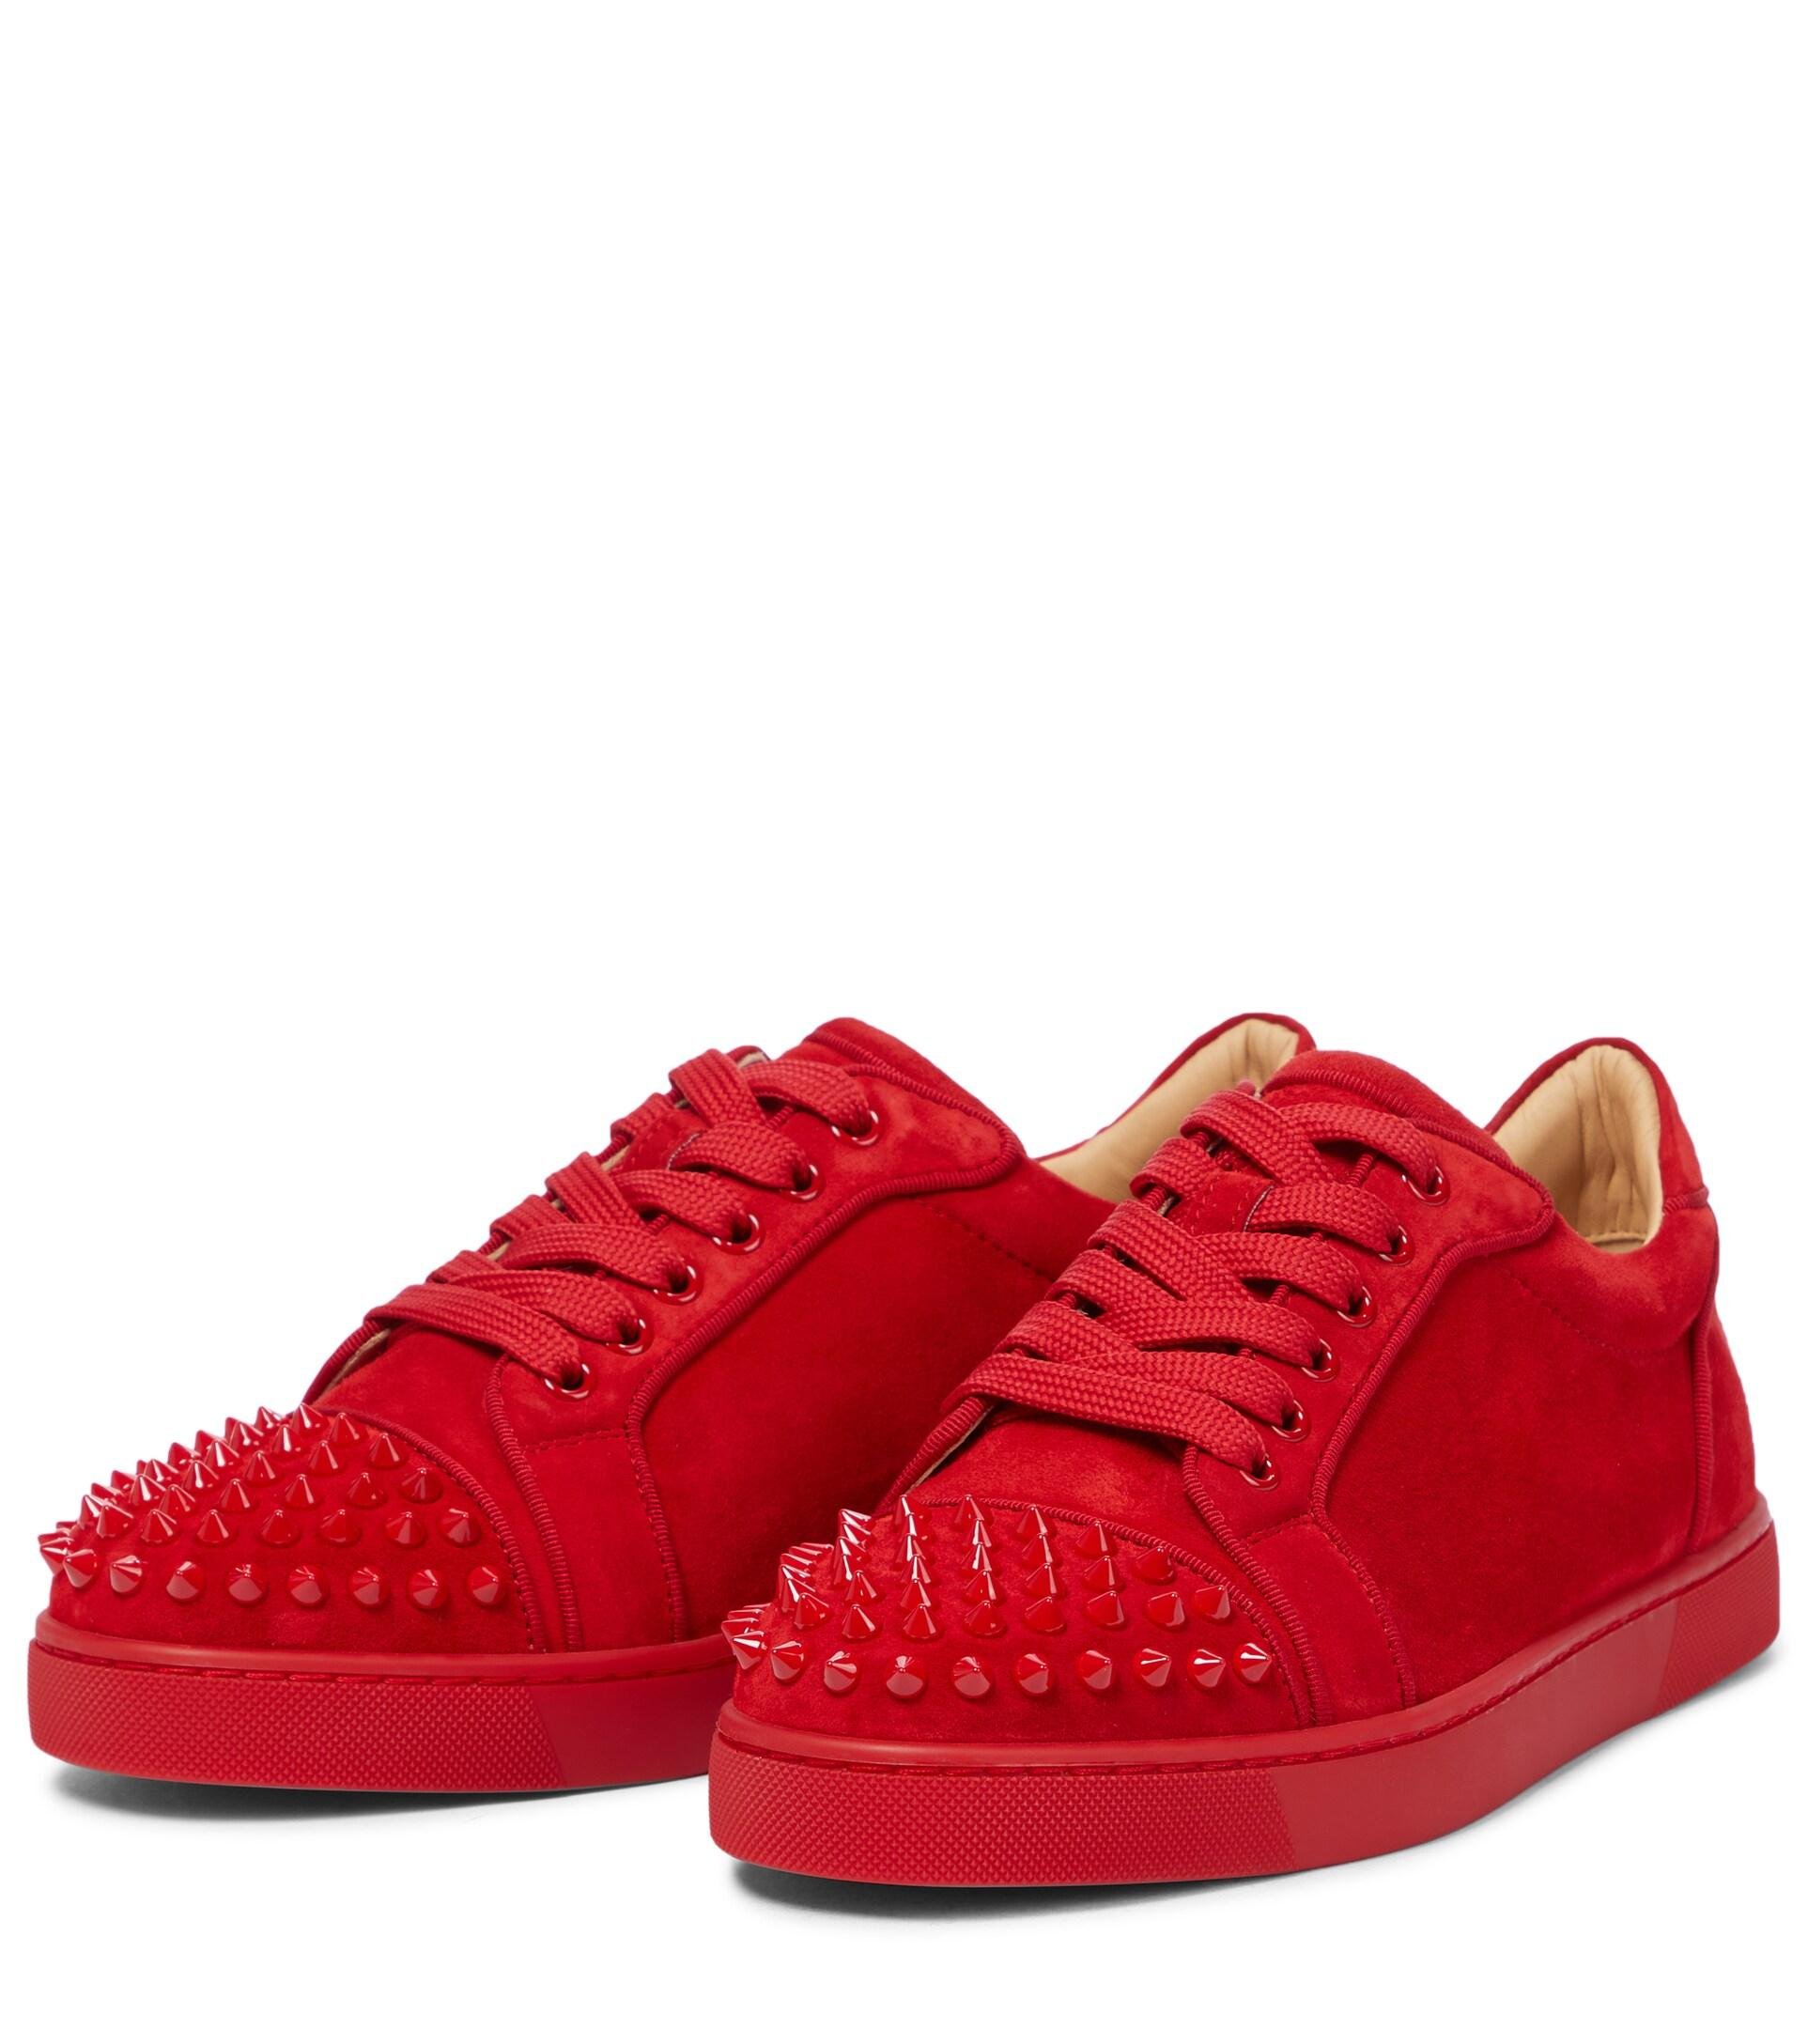 suede louboutin sneakers spikes